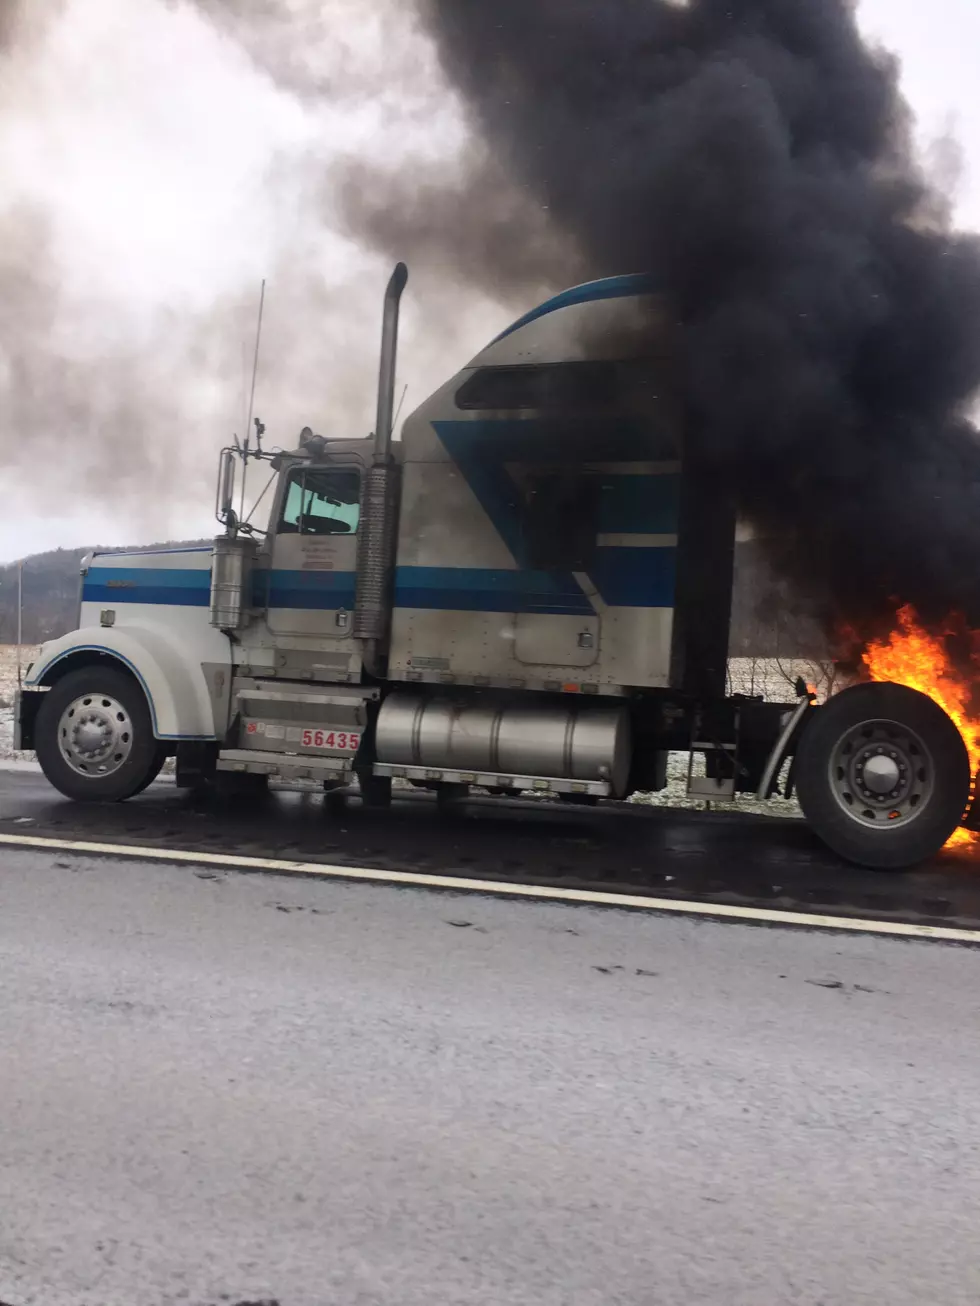 Just In:  Truck on Fire, I-88 Westbound Near Otego Truck Stop